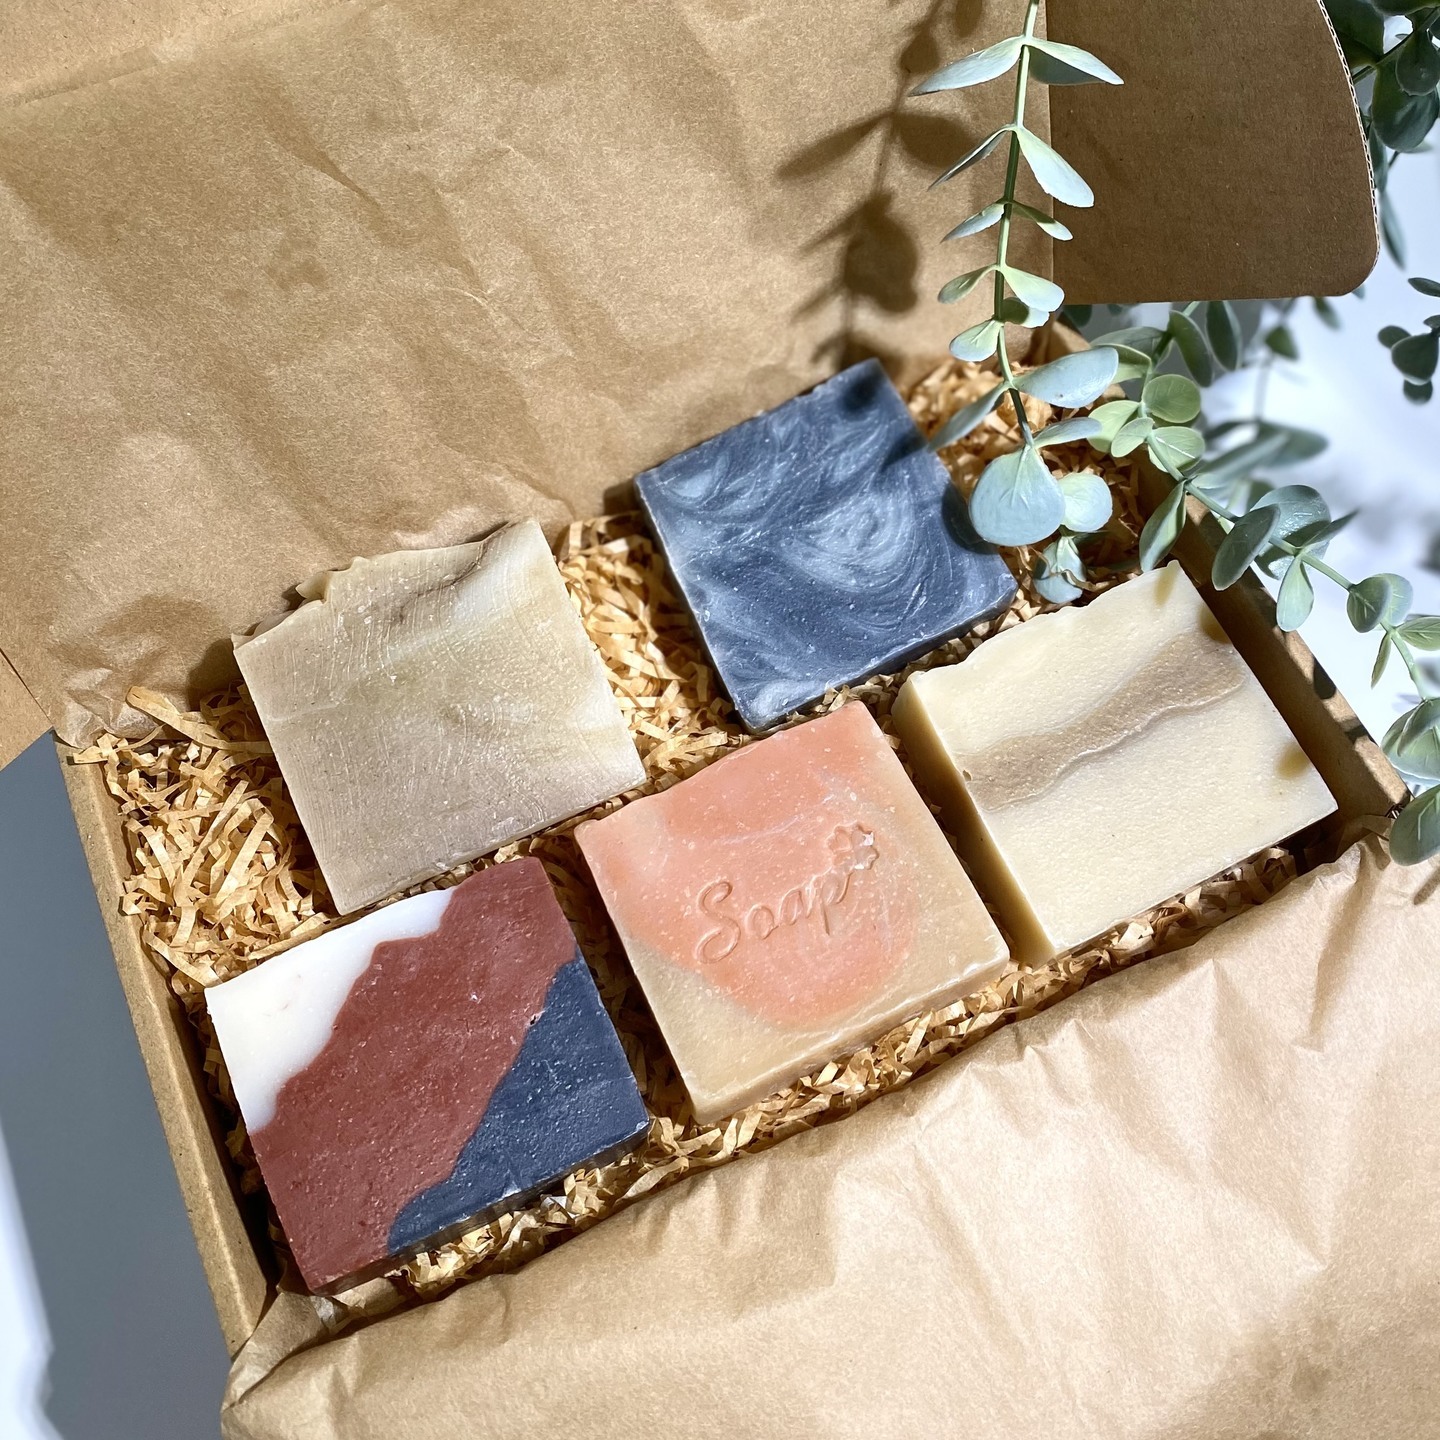 5 assorted Cold Process Soaps in a Gift Box